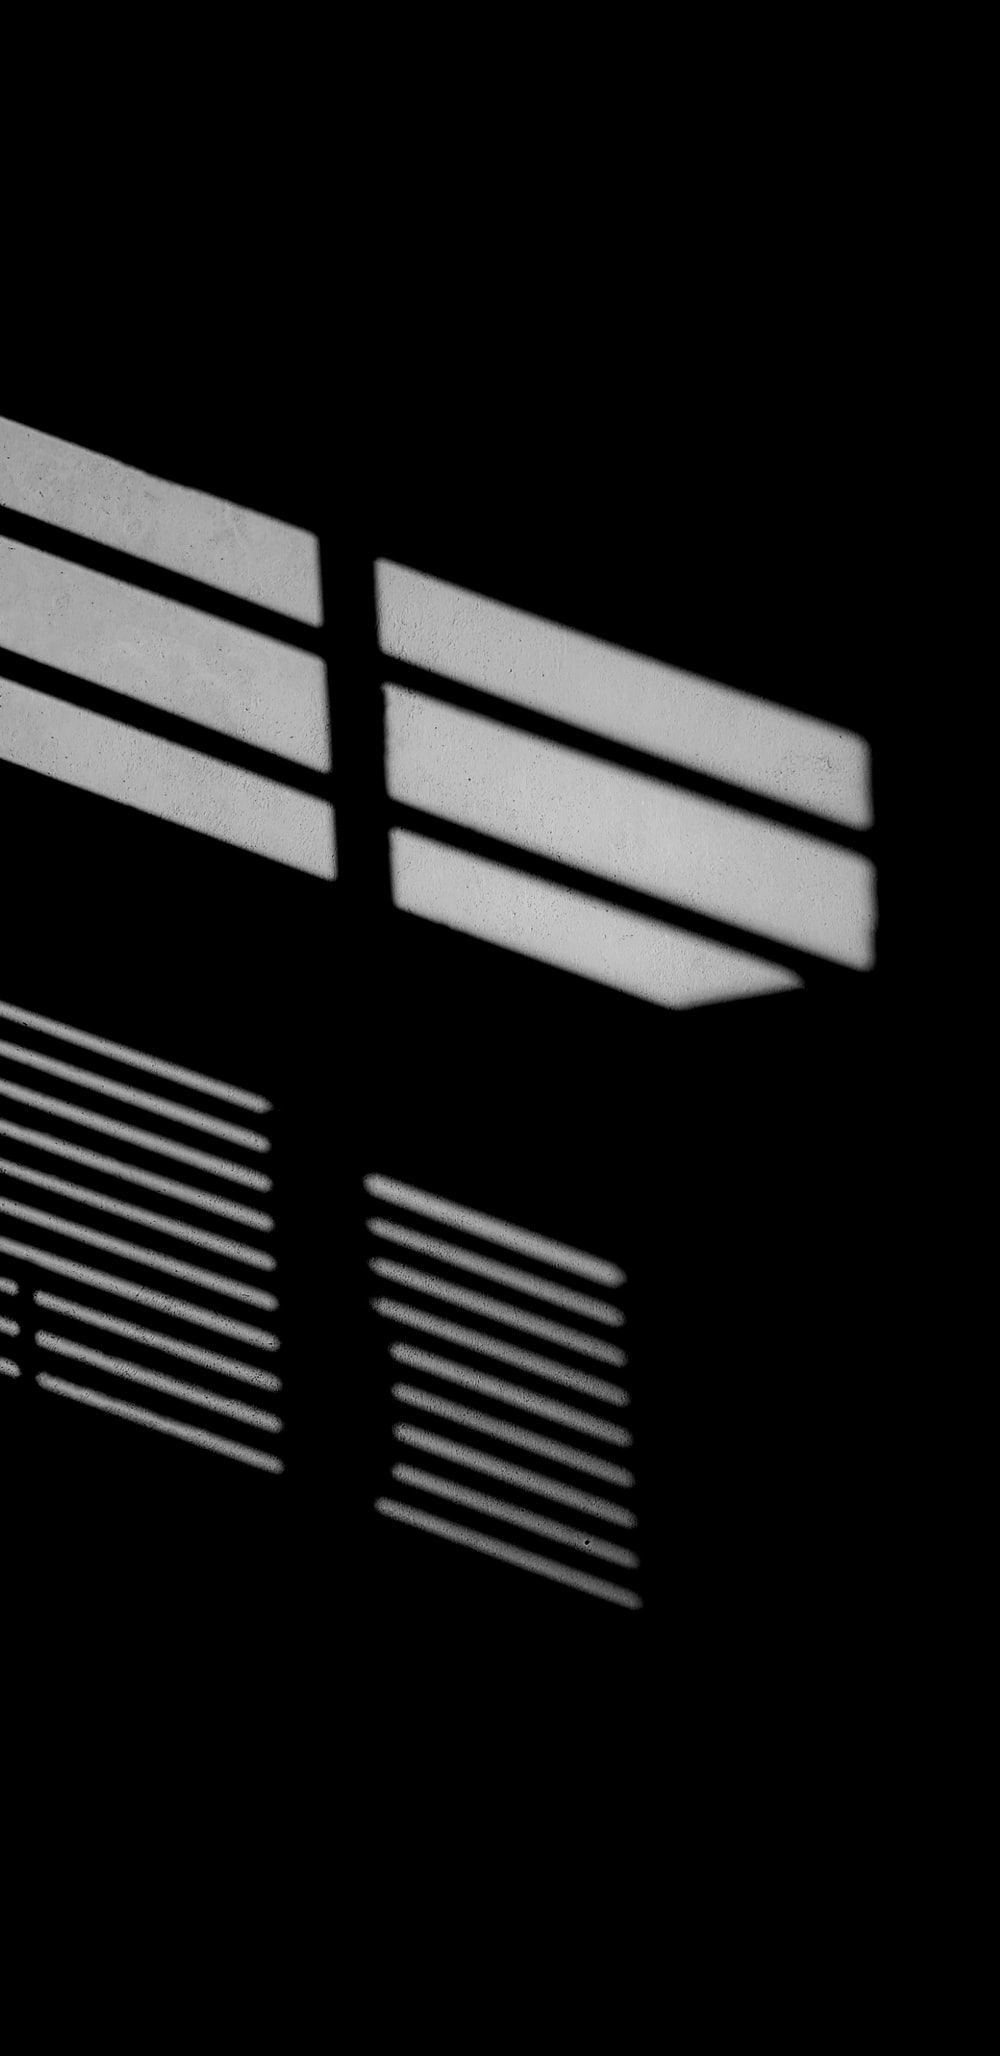 Window Shadow Picture. Download Free Image